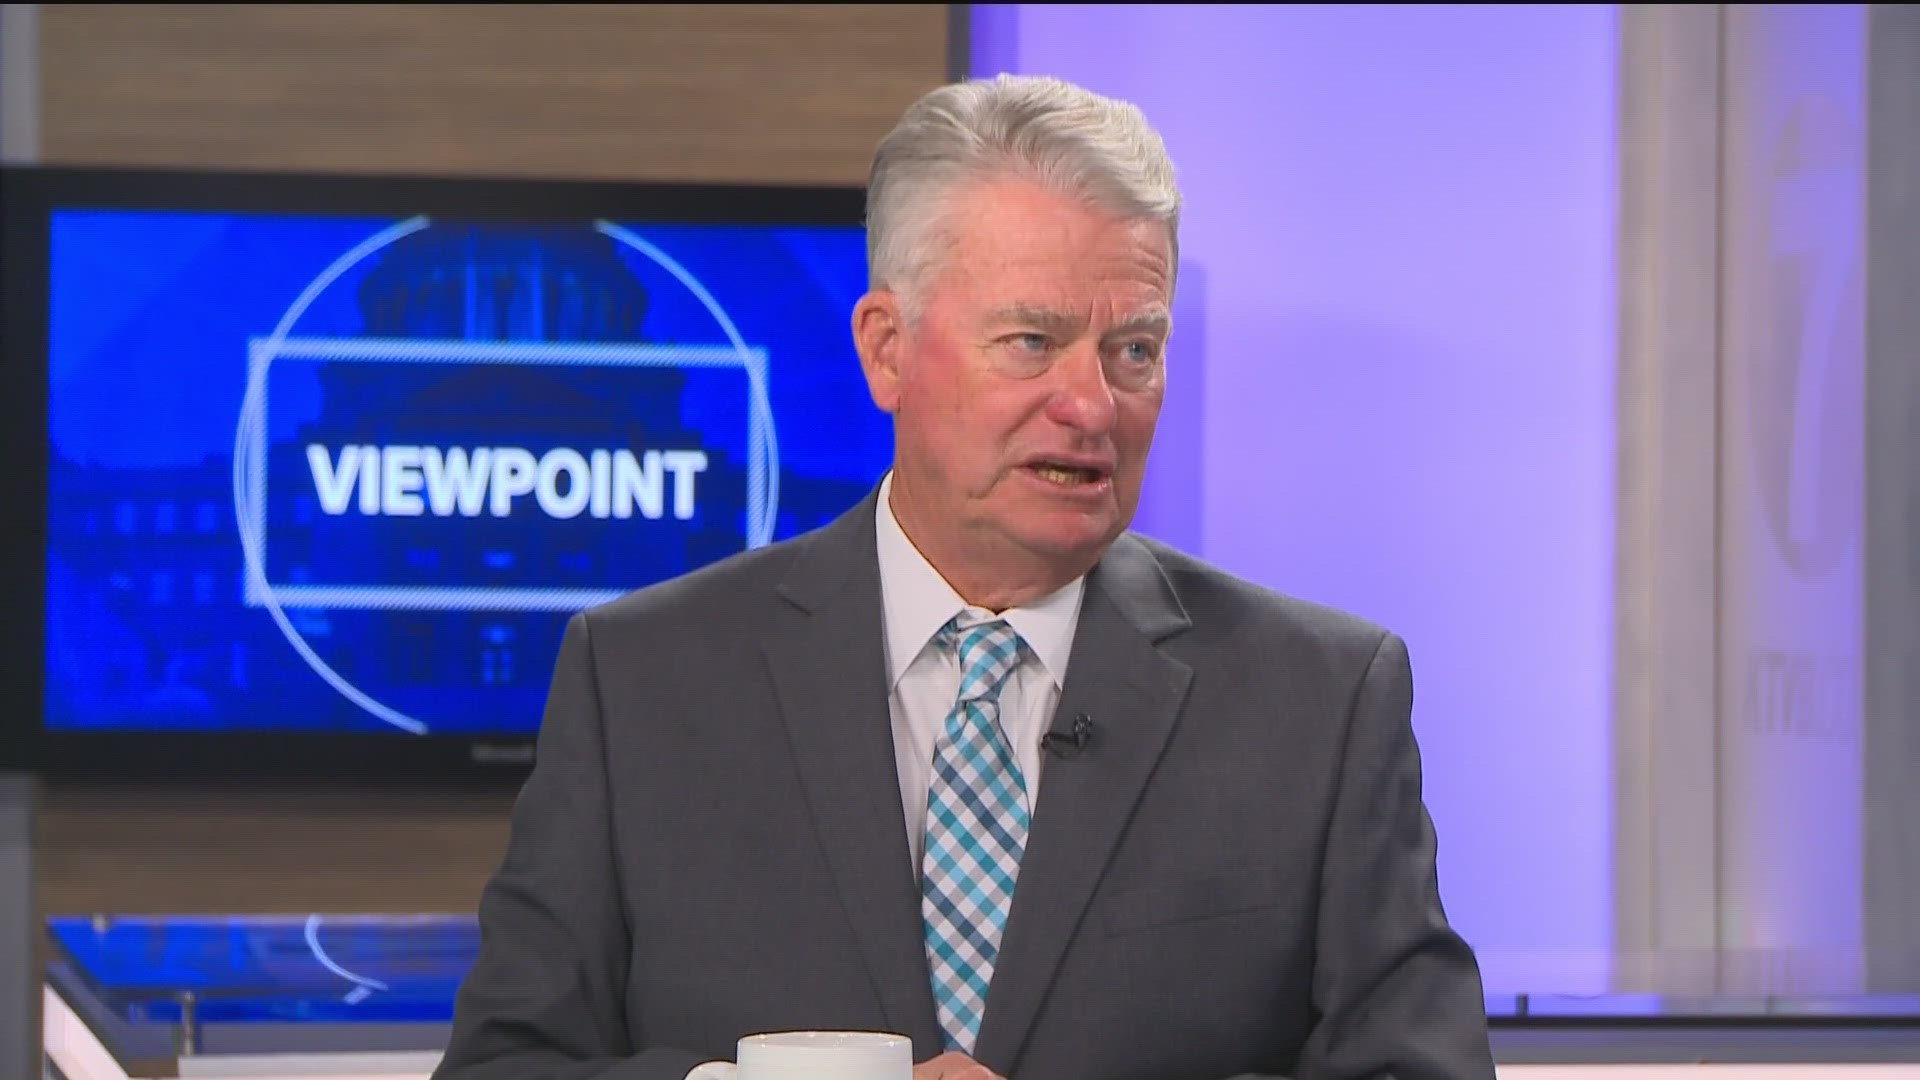 Watch Viewpoint at 9 a.m. Sunday on KTVB as Little discusses the fight against fentanyl, property tax relief and public education in an interview with Doug Petcash.